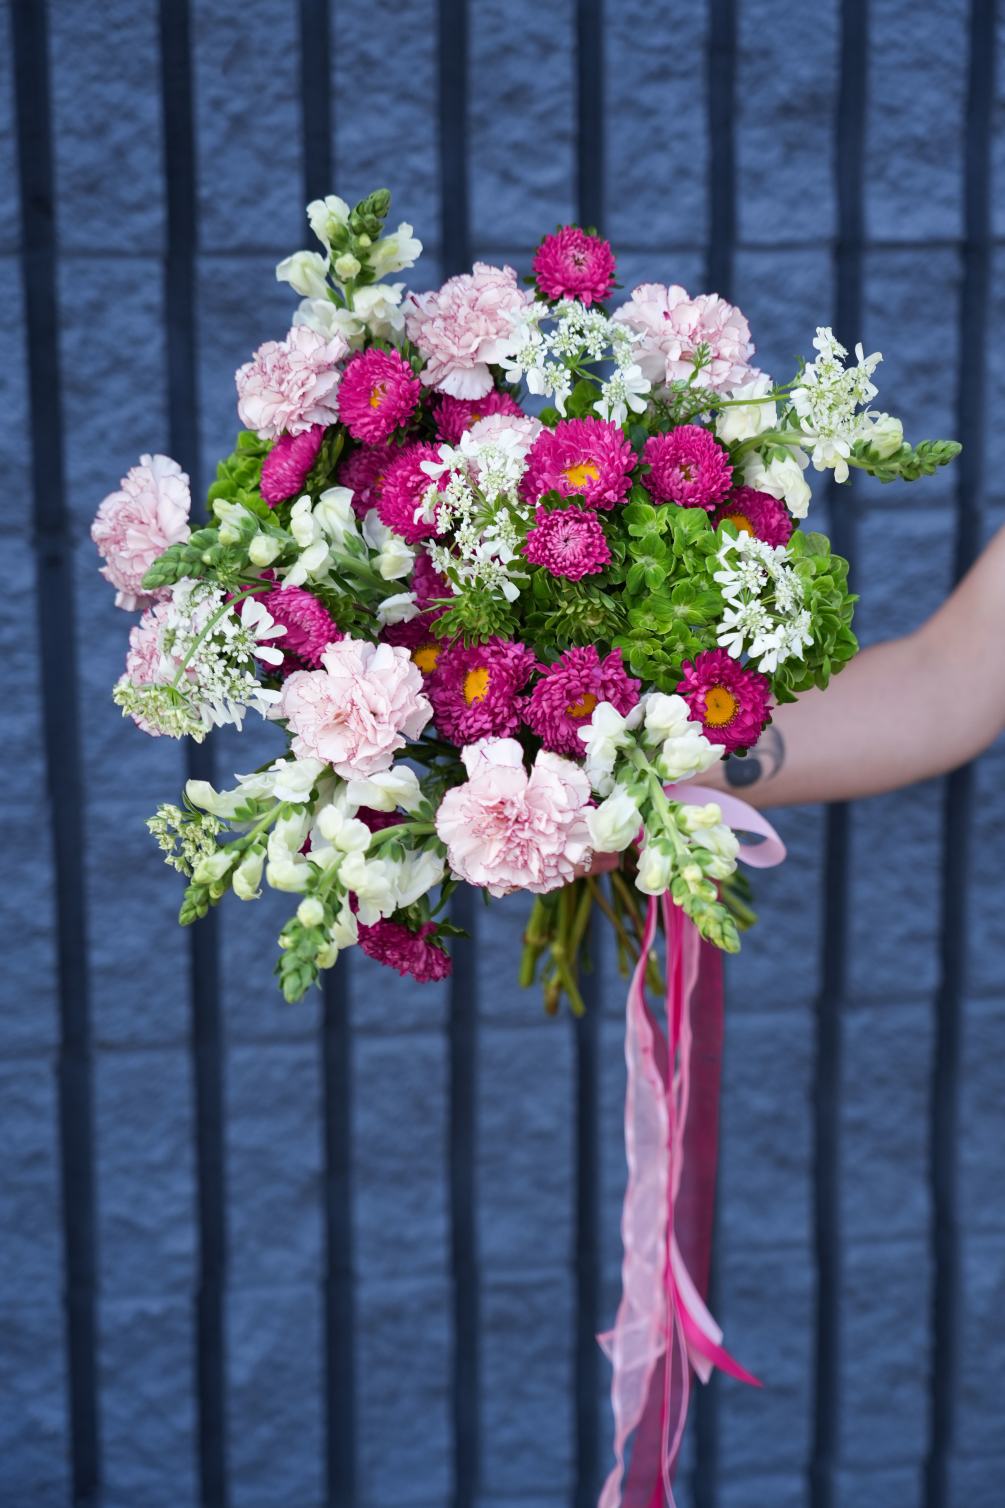 The bouquet could be named &quot;Carnival of Blossoms.&quot; This vibrant arrangement bursts